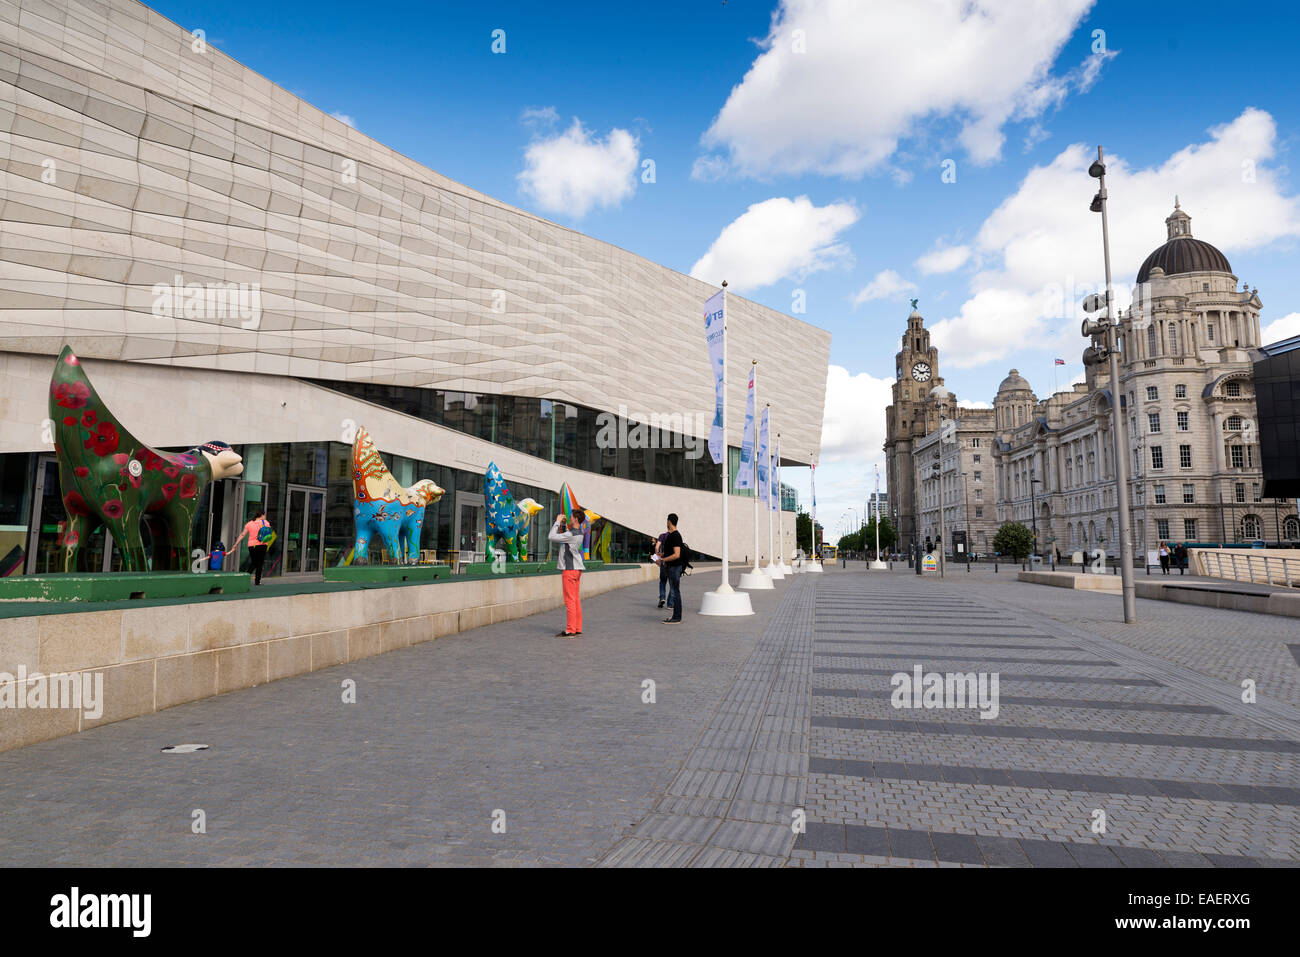 LIVERPOOL, UNITED KINGDOM - JUNE 10, 2014: The Museum of Liverpool, which opened in 2011 in a brand new building on Liverpool's Stock Photo